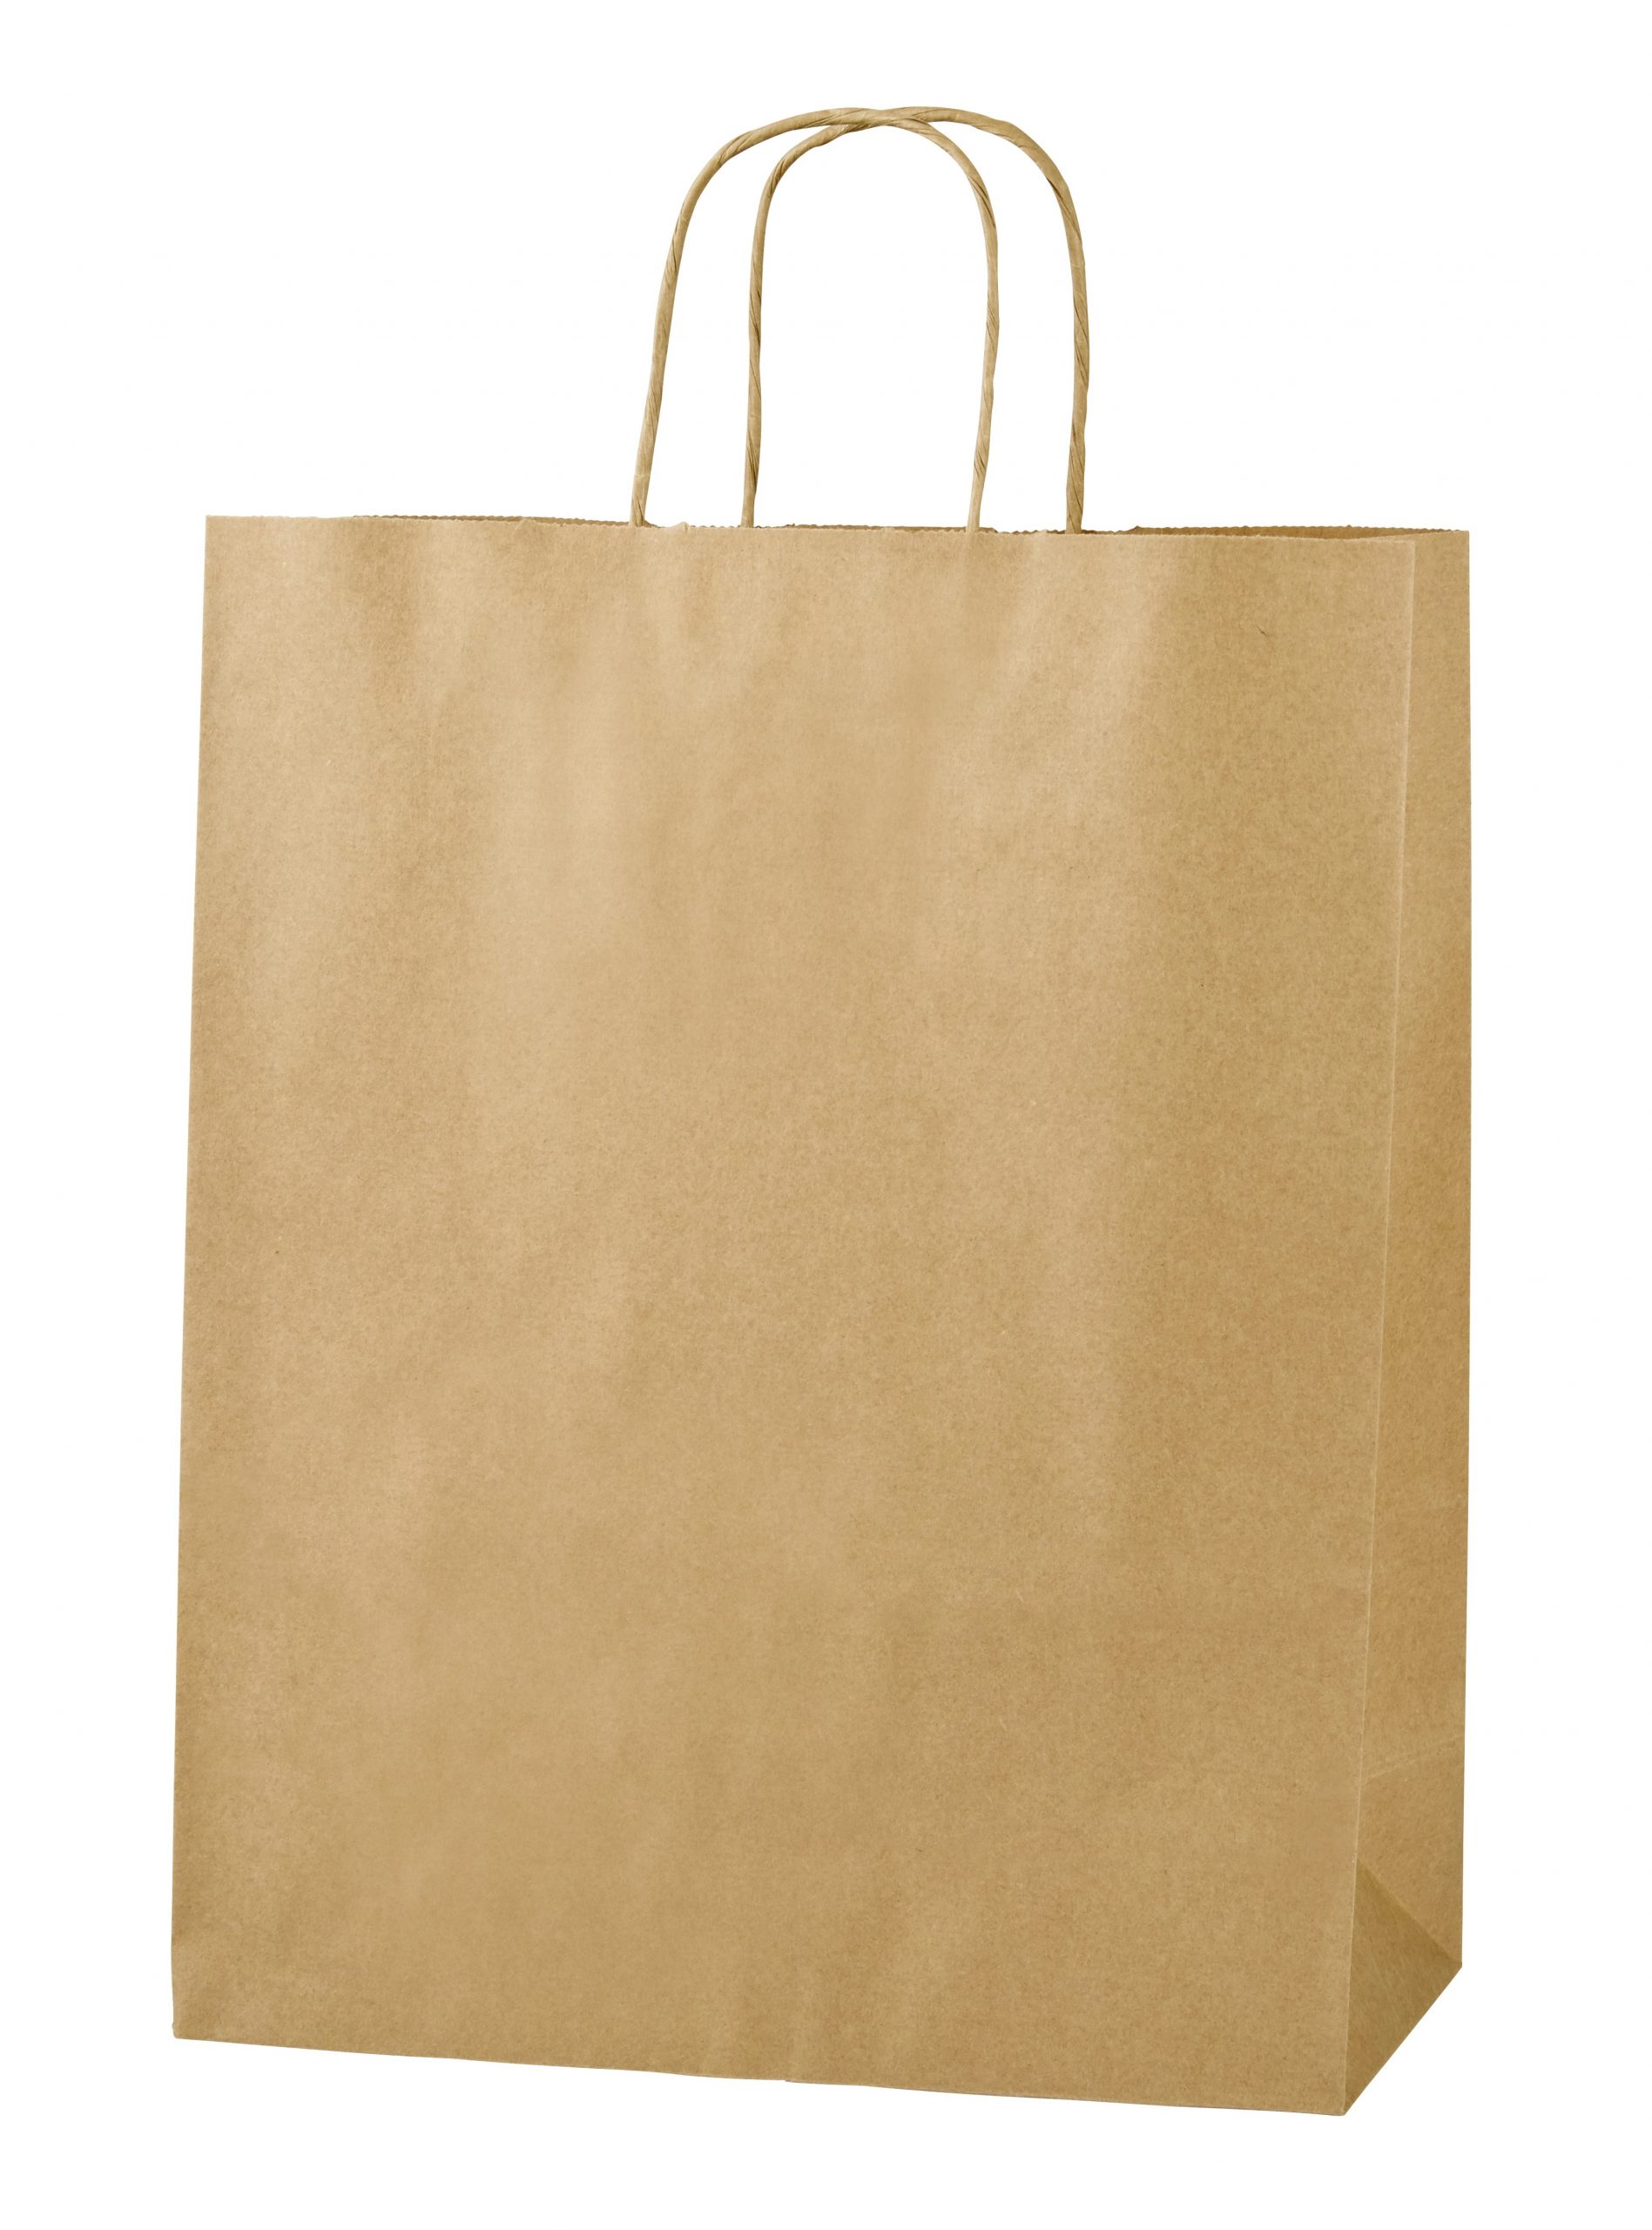 22cm x 31cm x 10cm 50 x Brown Paper Bags with Twisted Handle MEDIUM